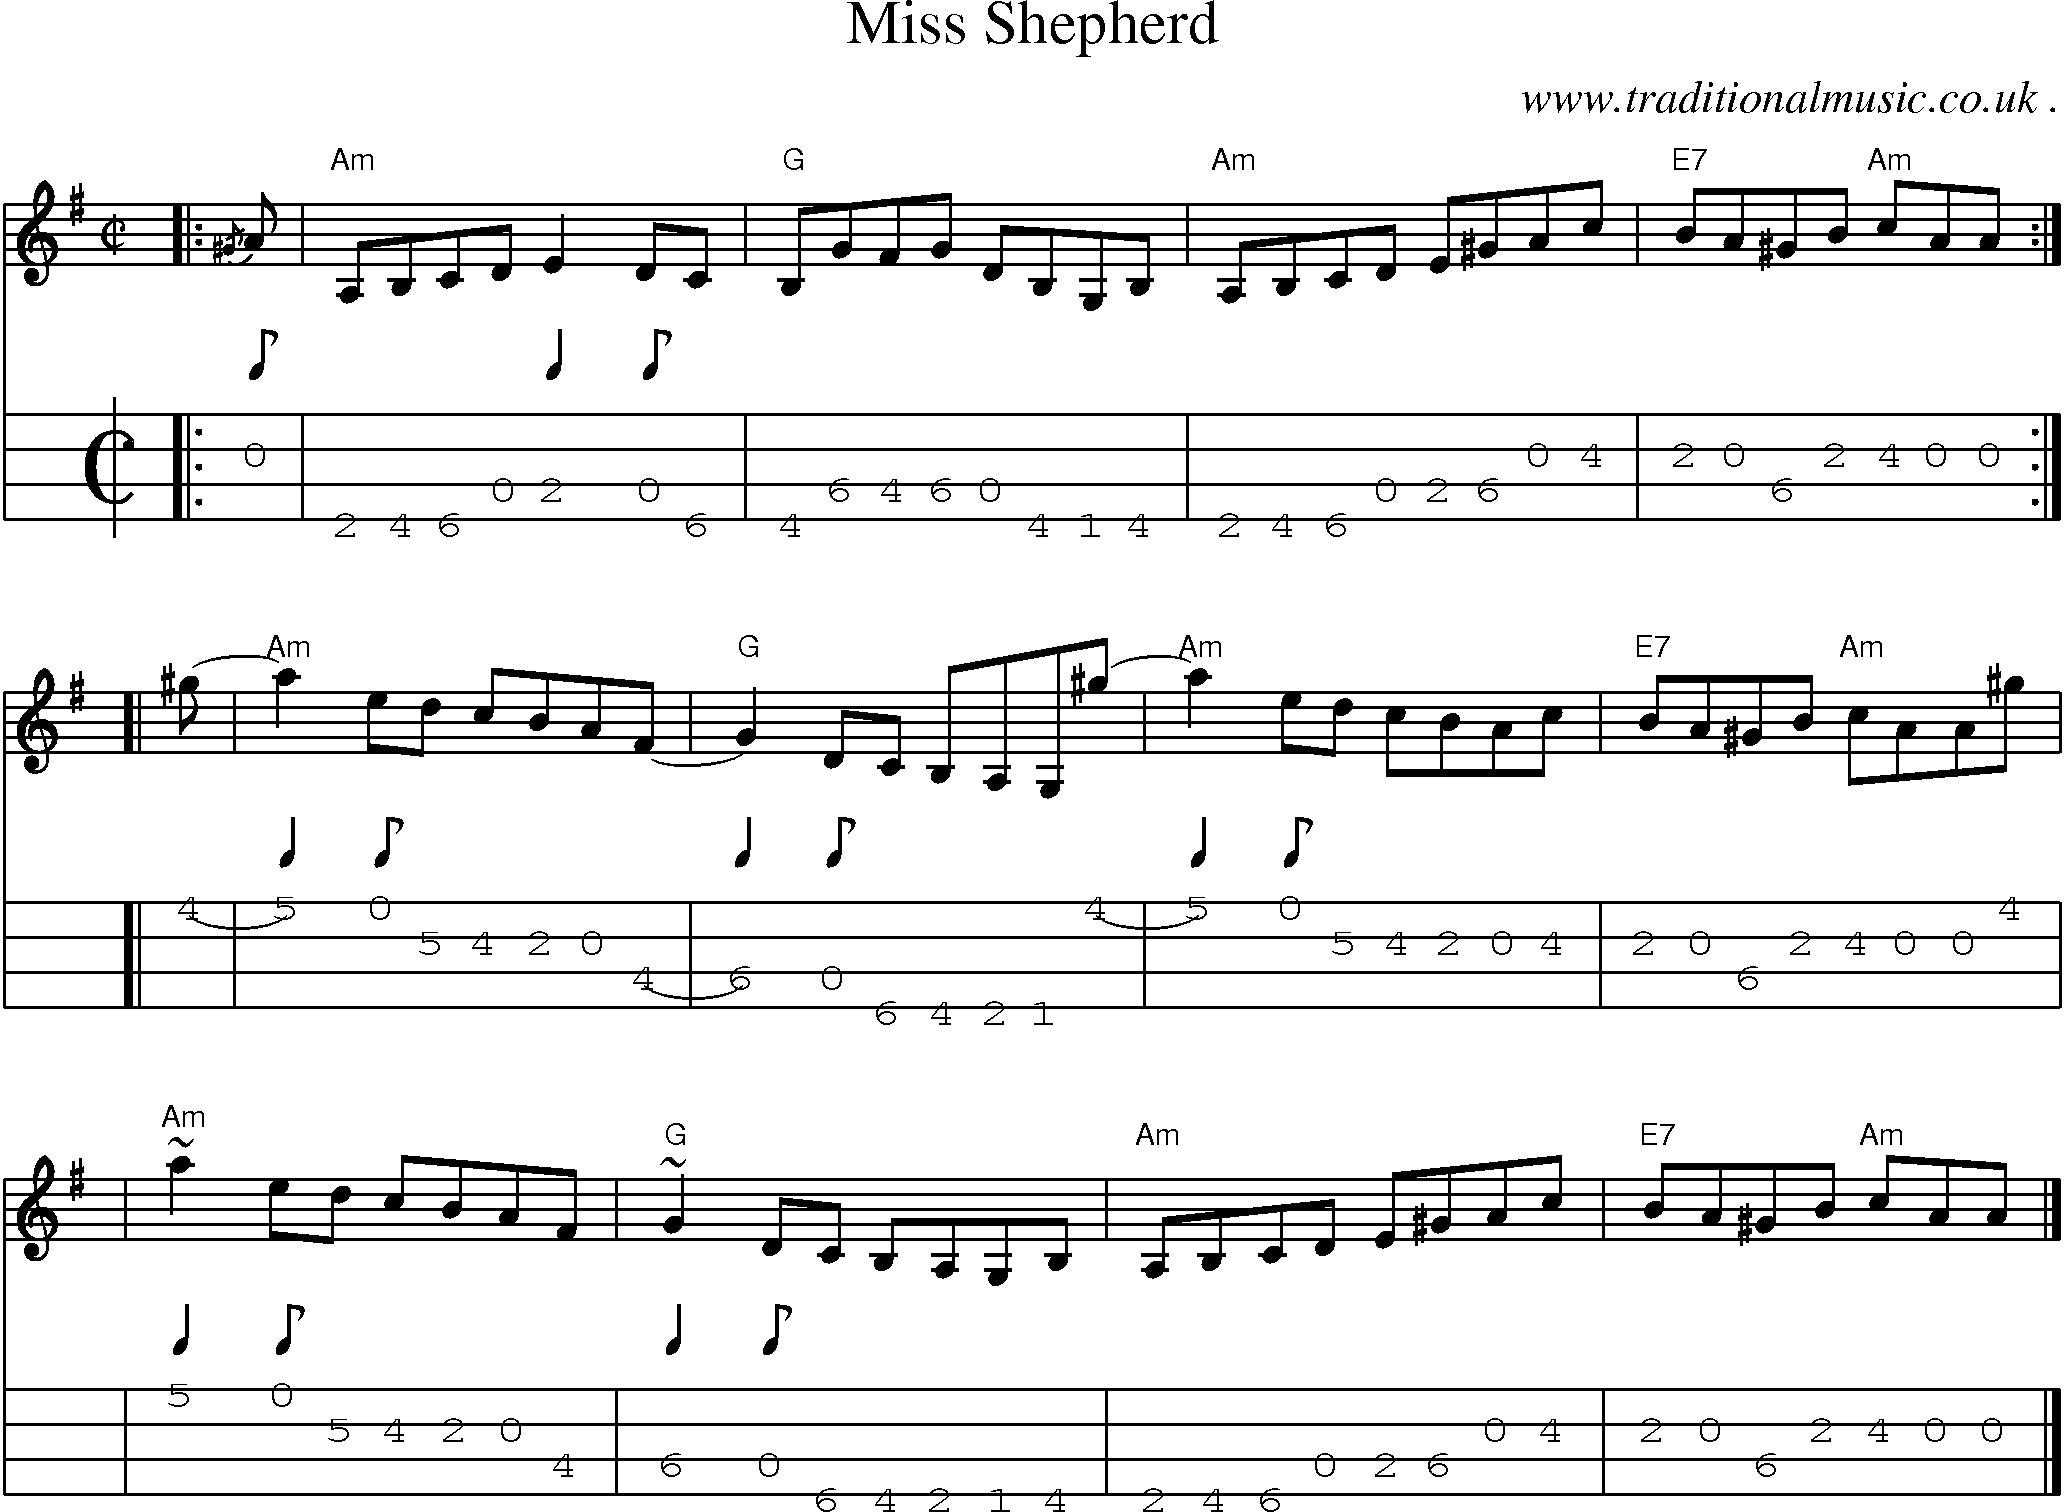 Sheet-music  score, Chords and Mandolin Tabs for Miss Shepherd